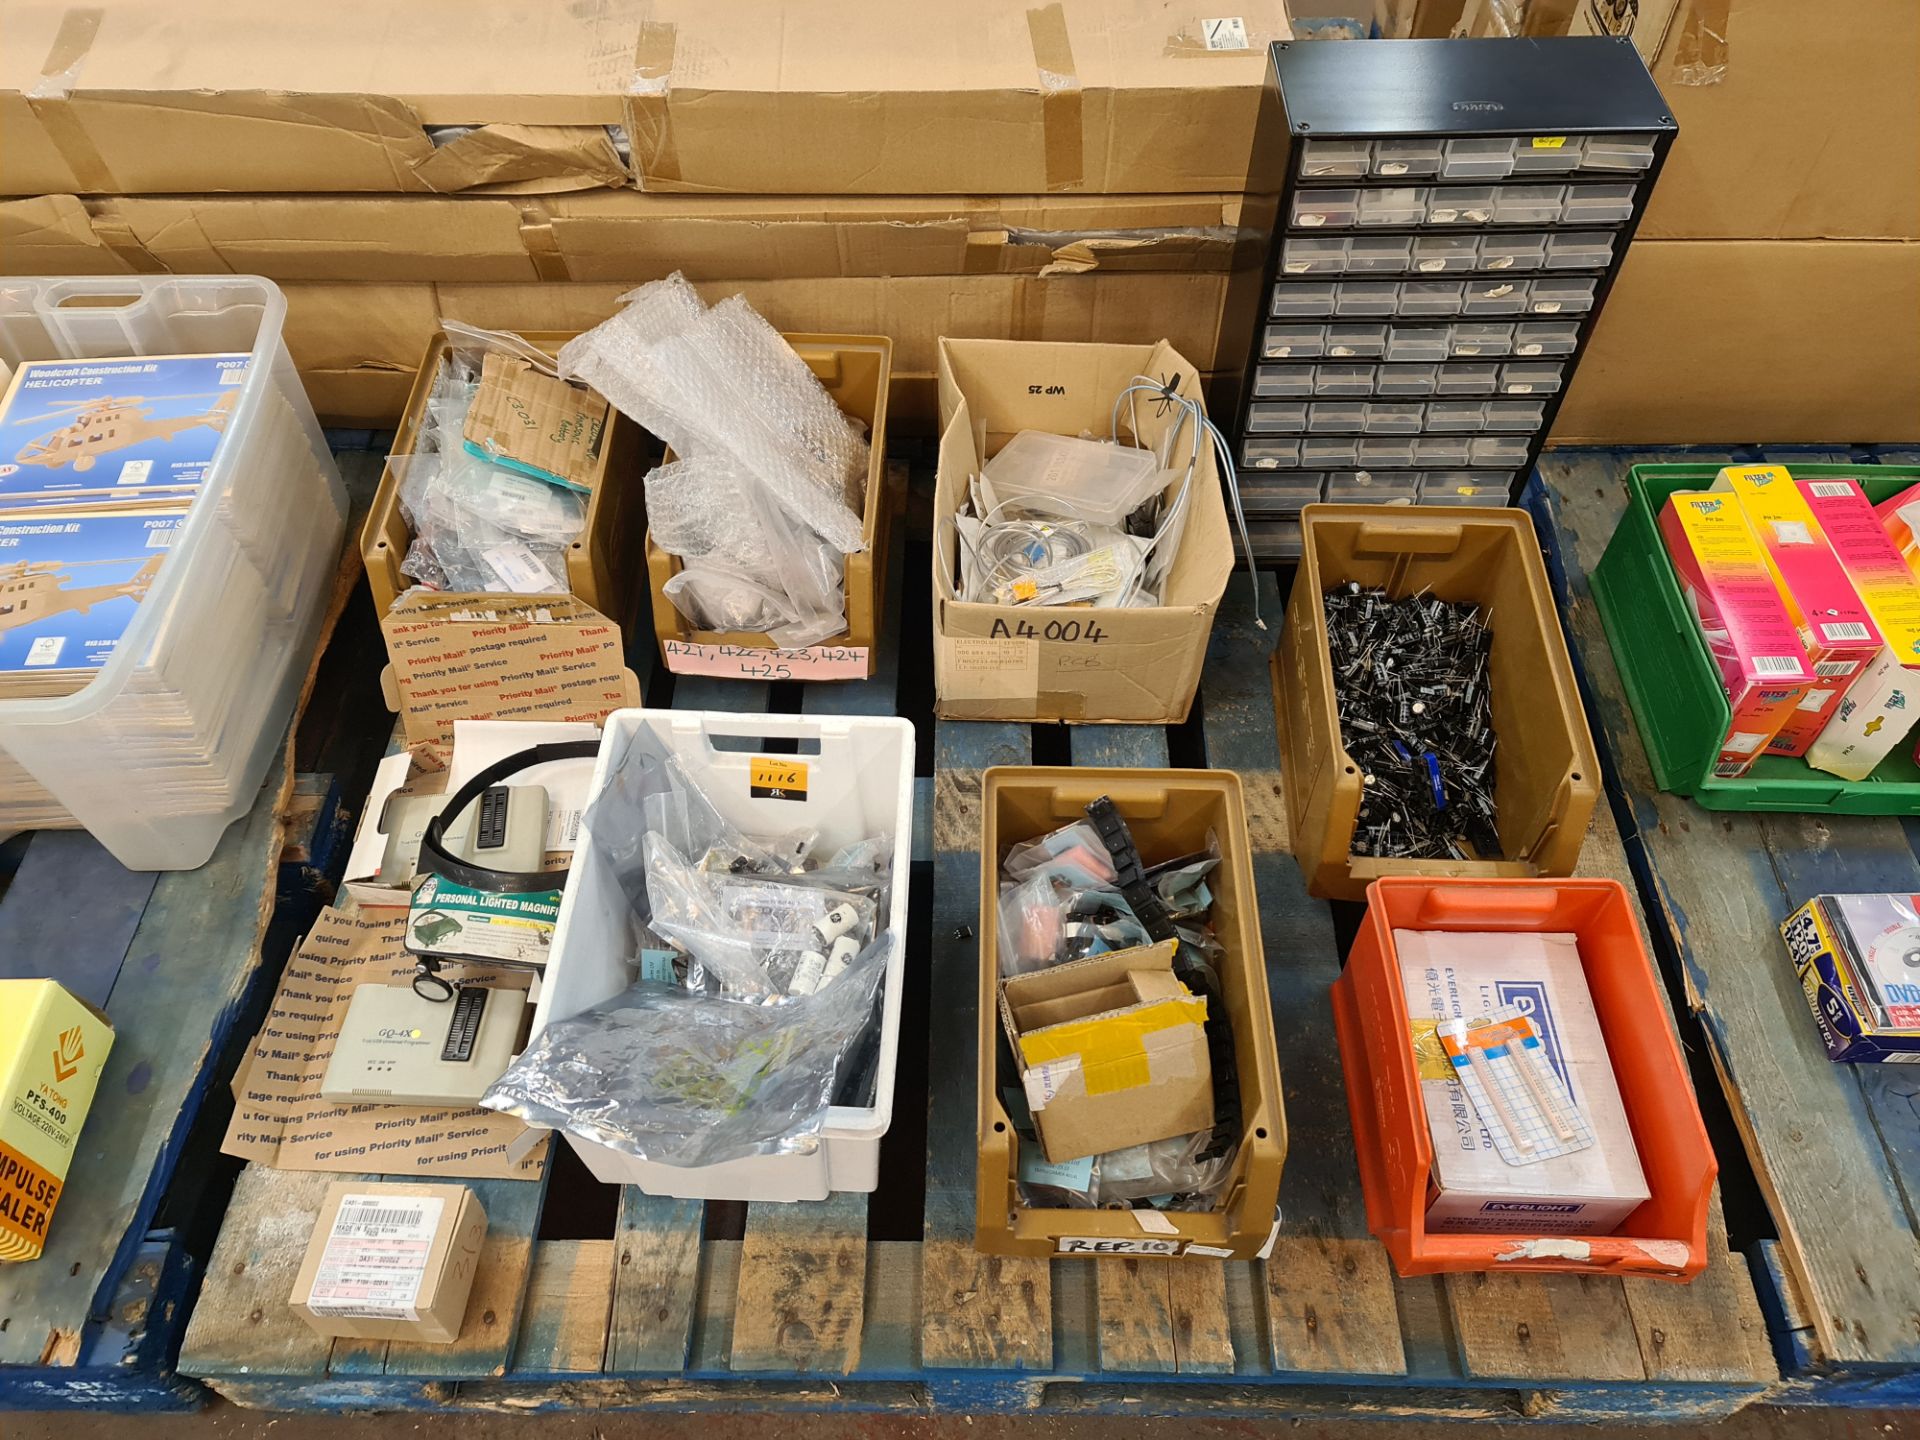 The contents of a pallet of assorted components, parts and spares